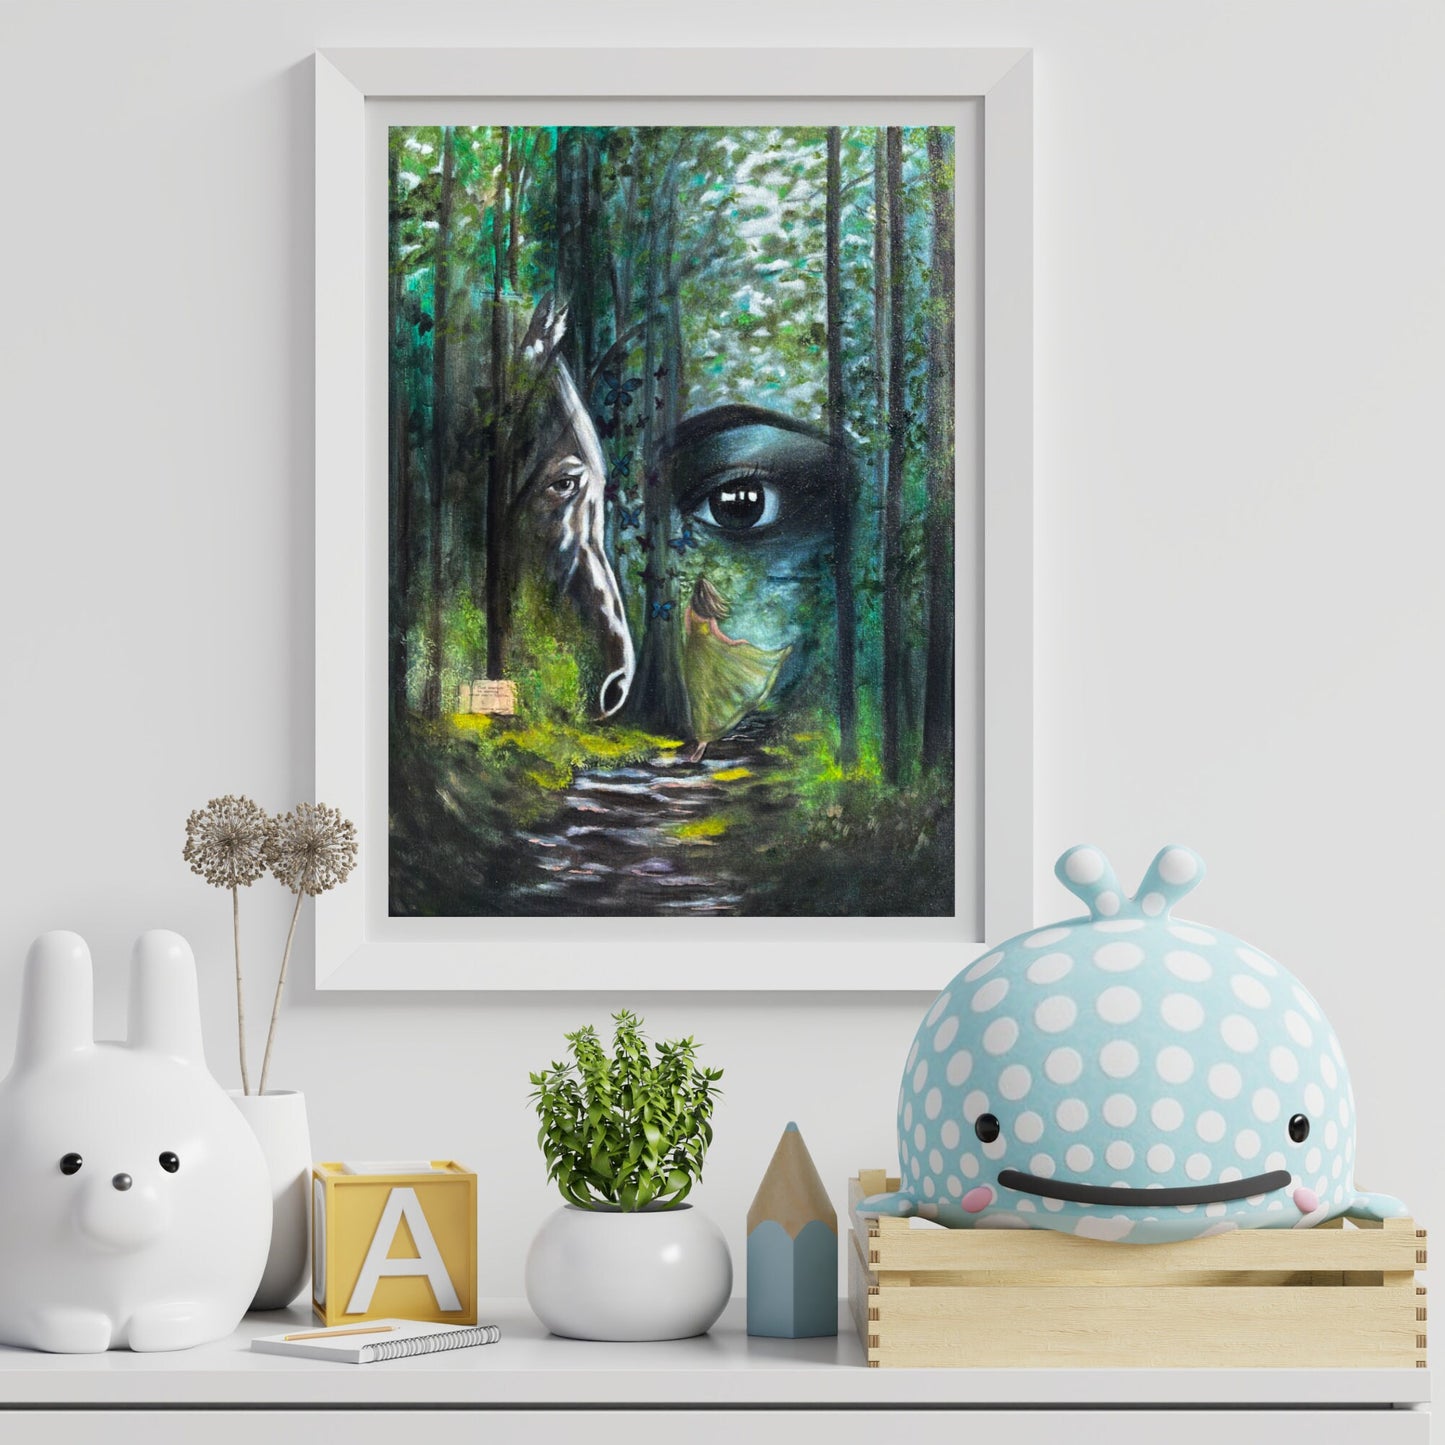 Art Print "Whispers in the Woods" Acrylic and Oil Painting